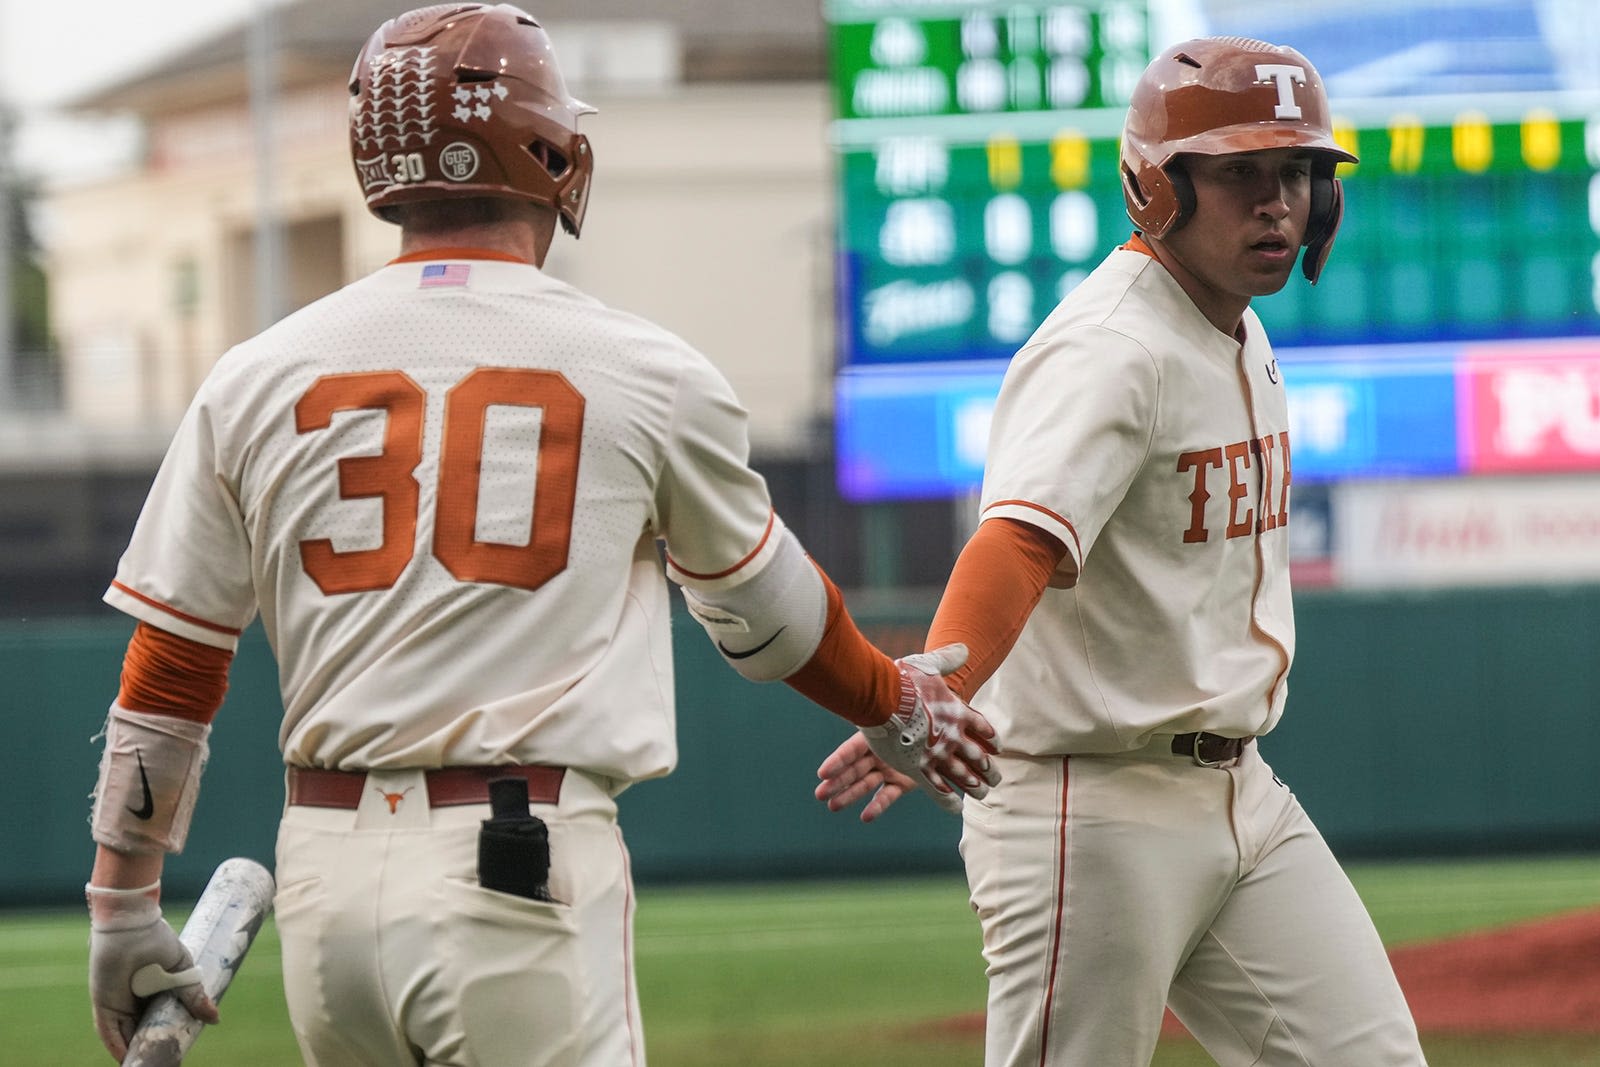 Despite early exit, Texas projected as No. 2 seed in NCAA Regional projections